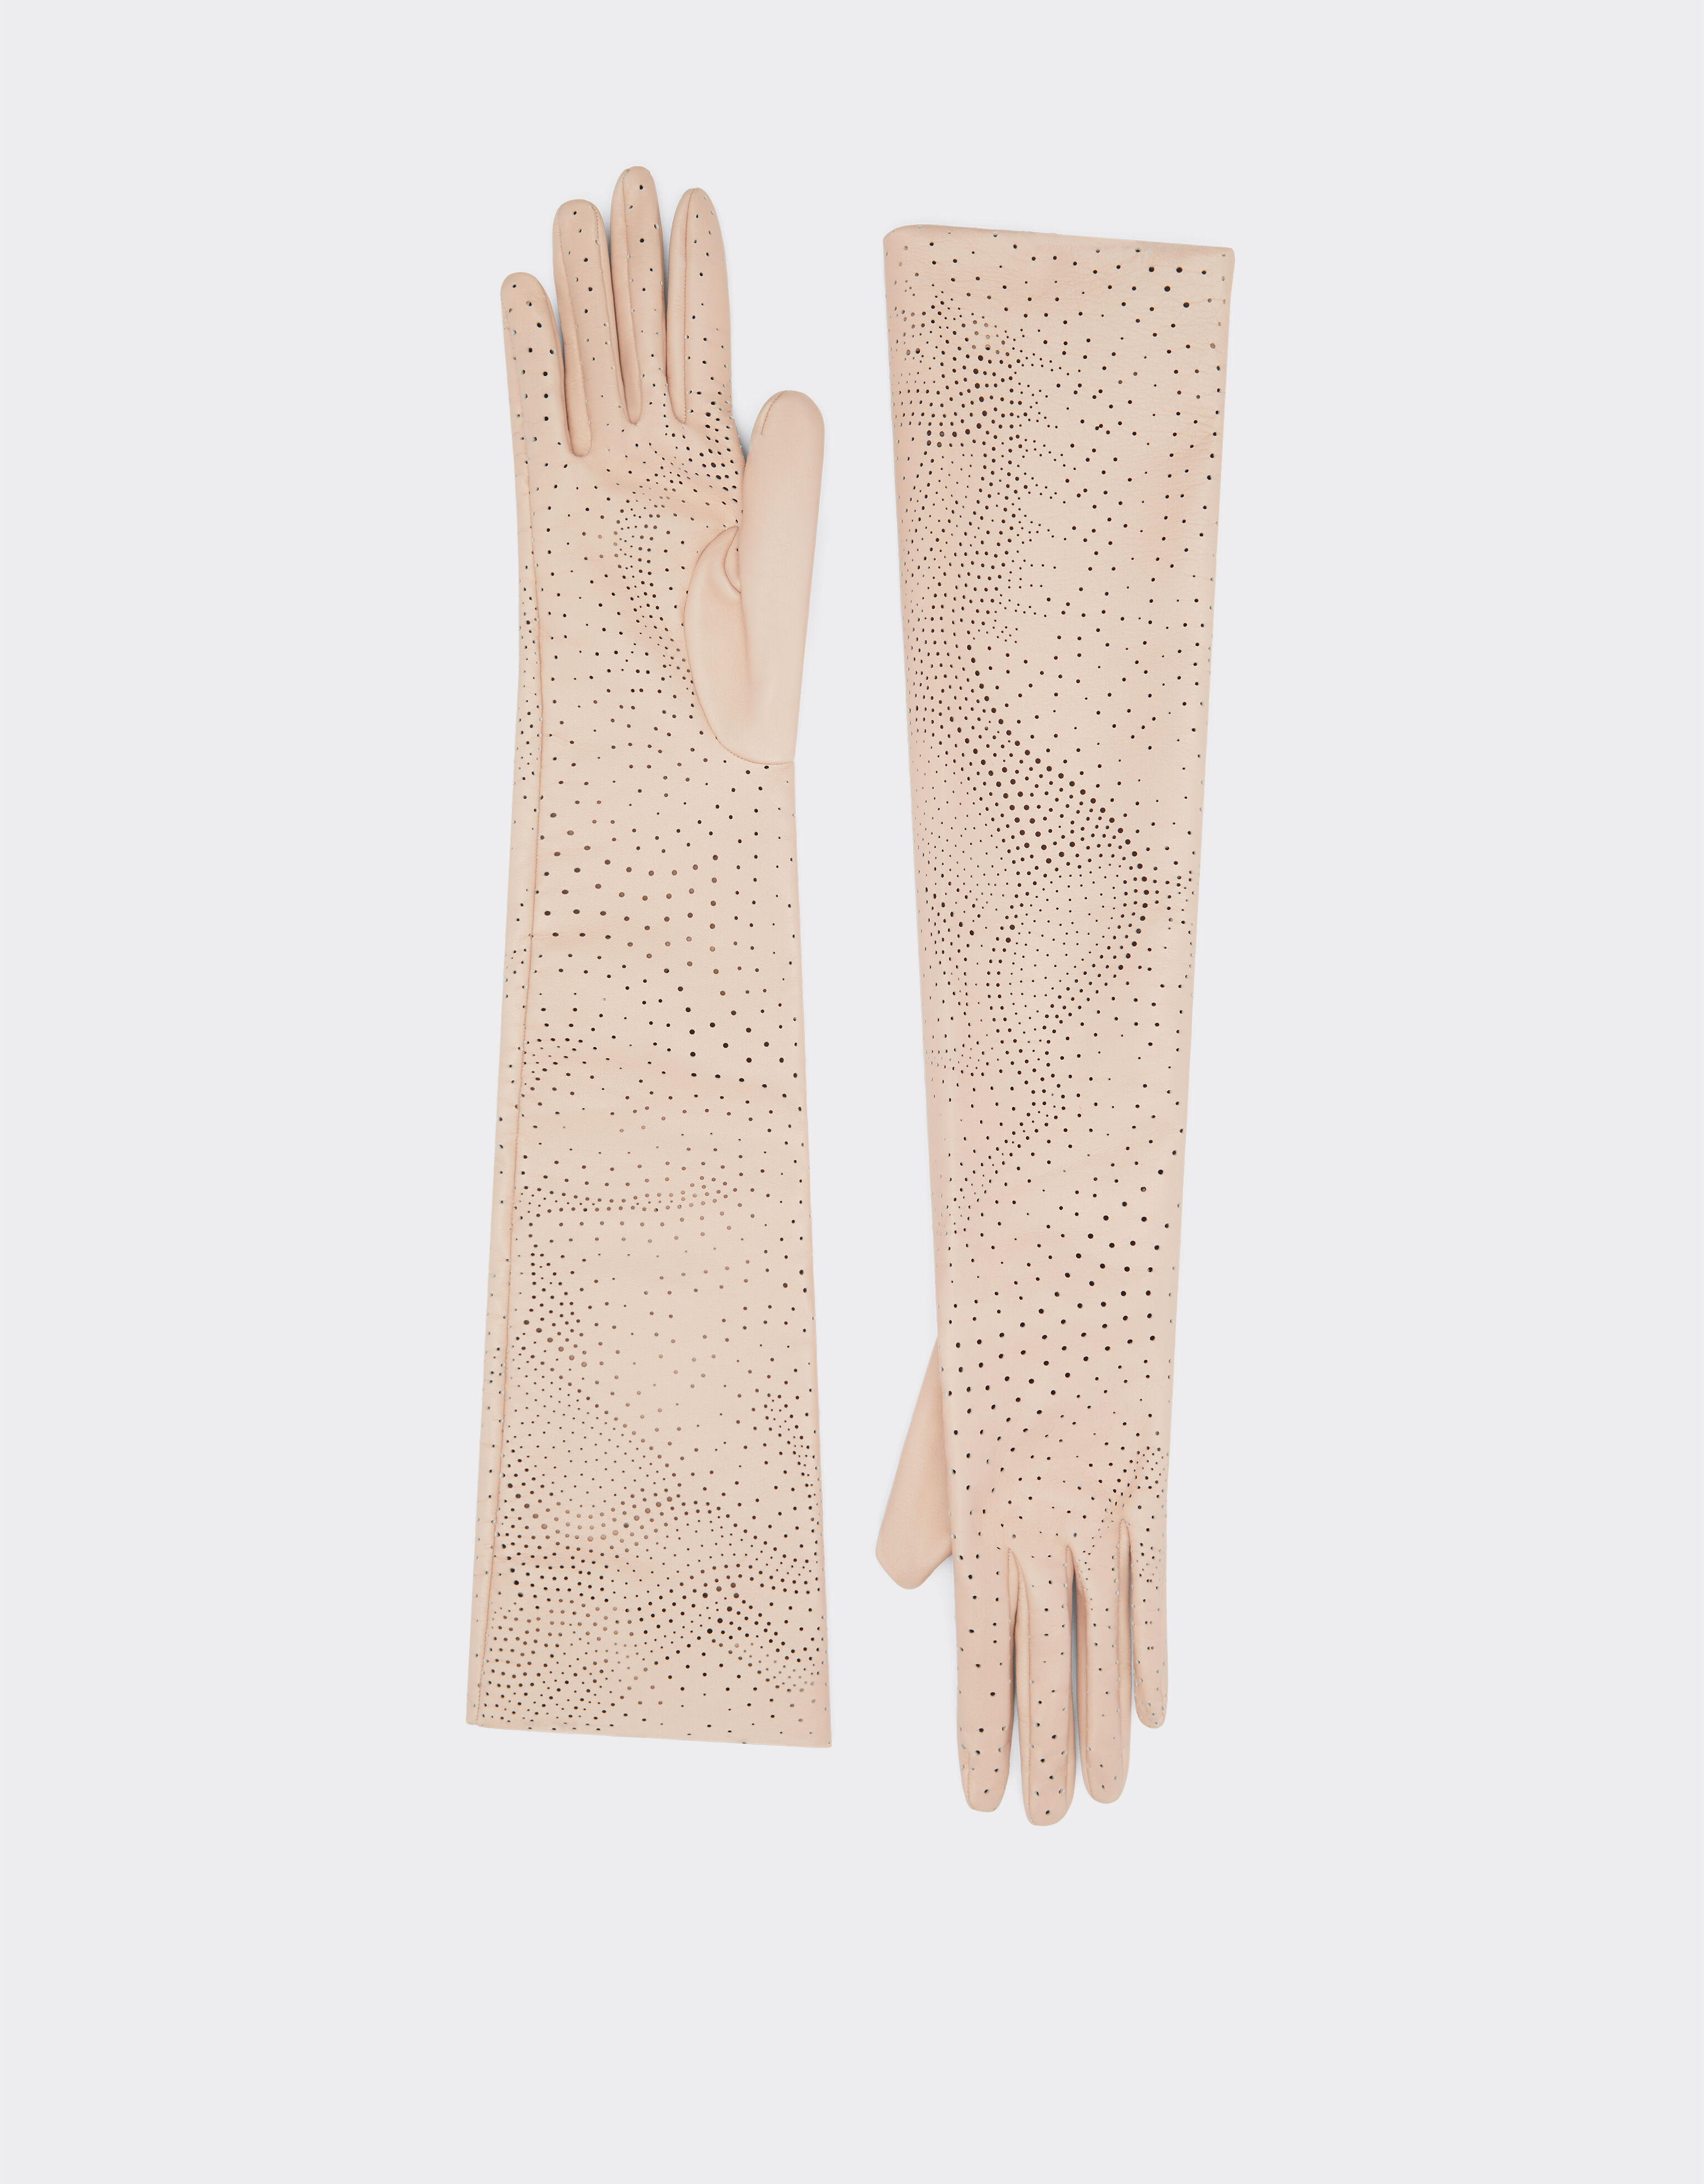 Ferrari Long gloves in perforated leather Nude 20694f